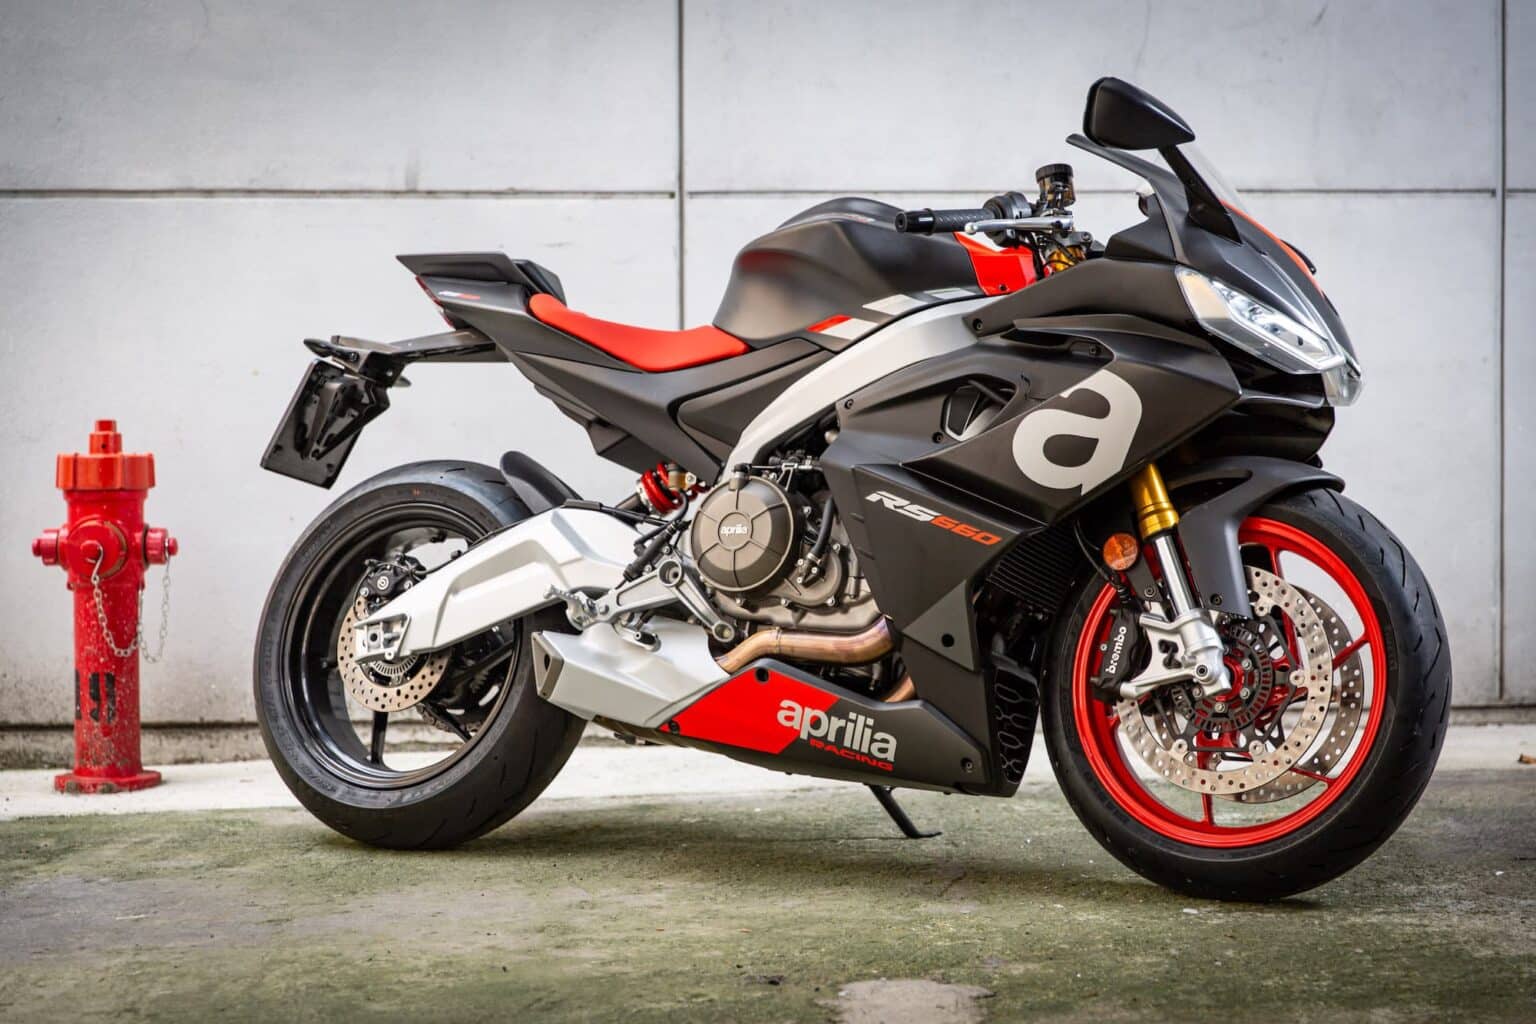 Aprilia-RS-660-review-RHS-static-outdoor-by-fire-hydrant-1536x1024.jpg